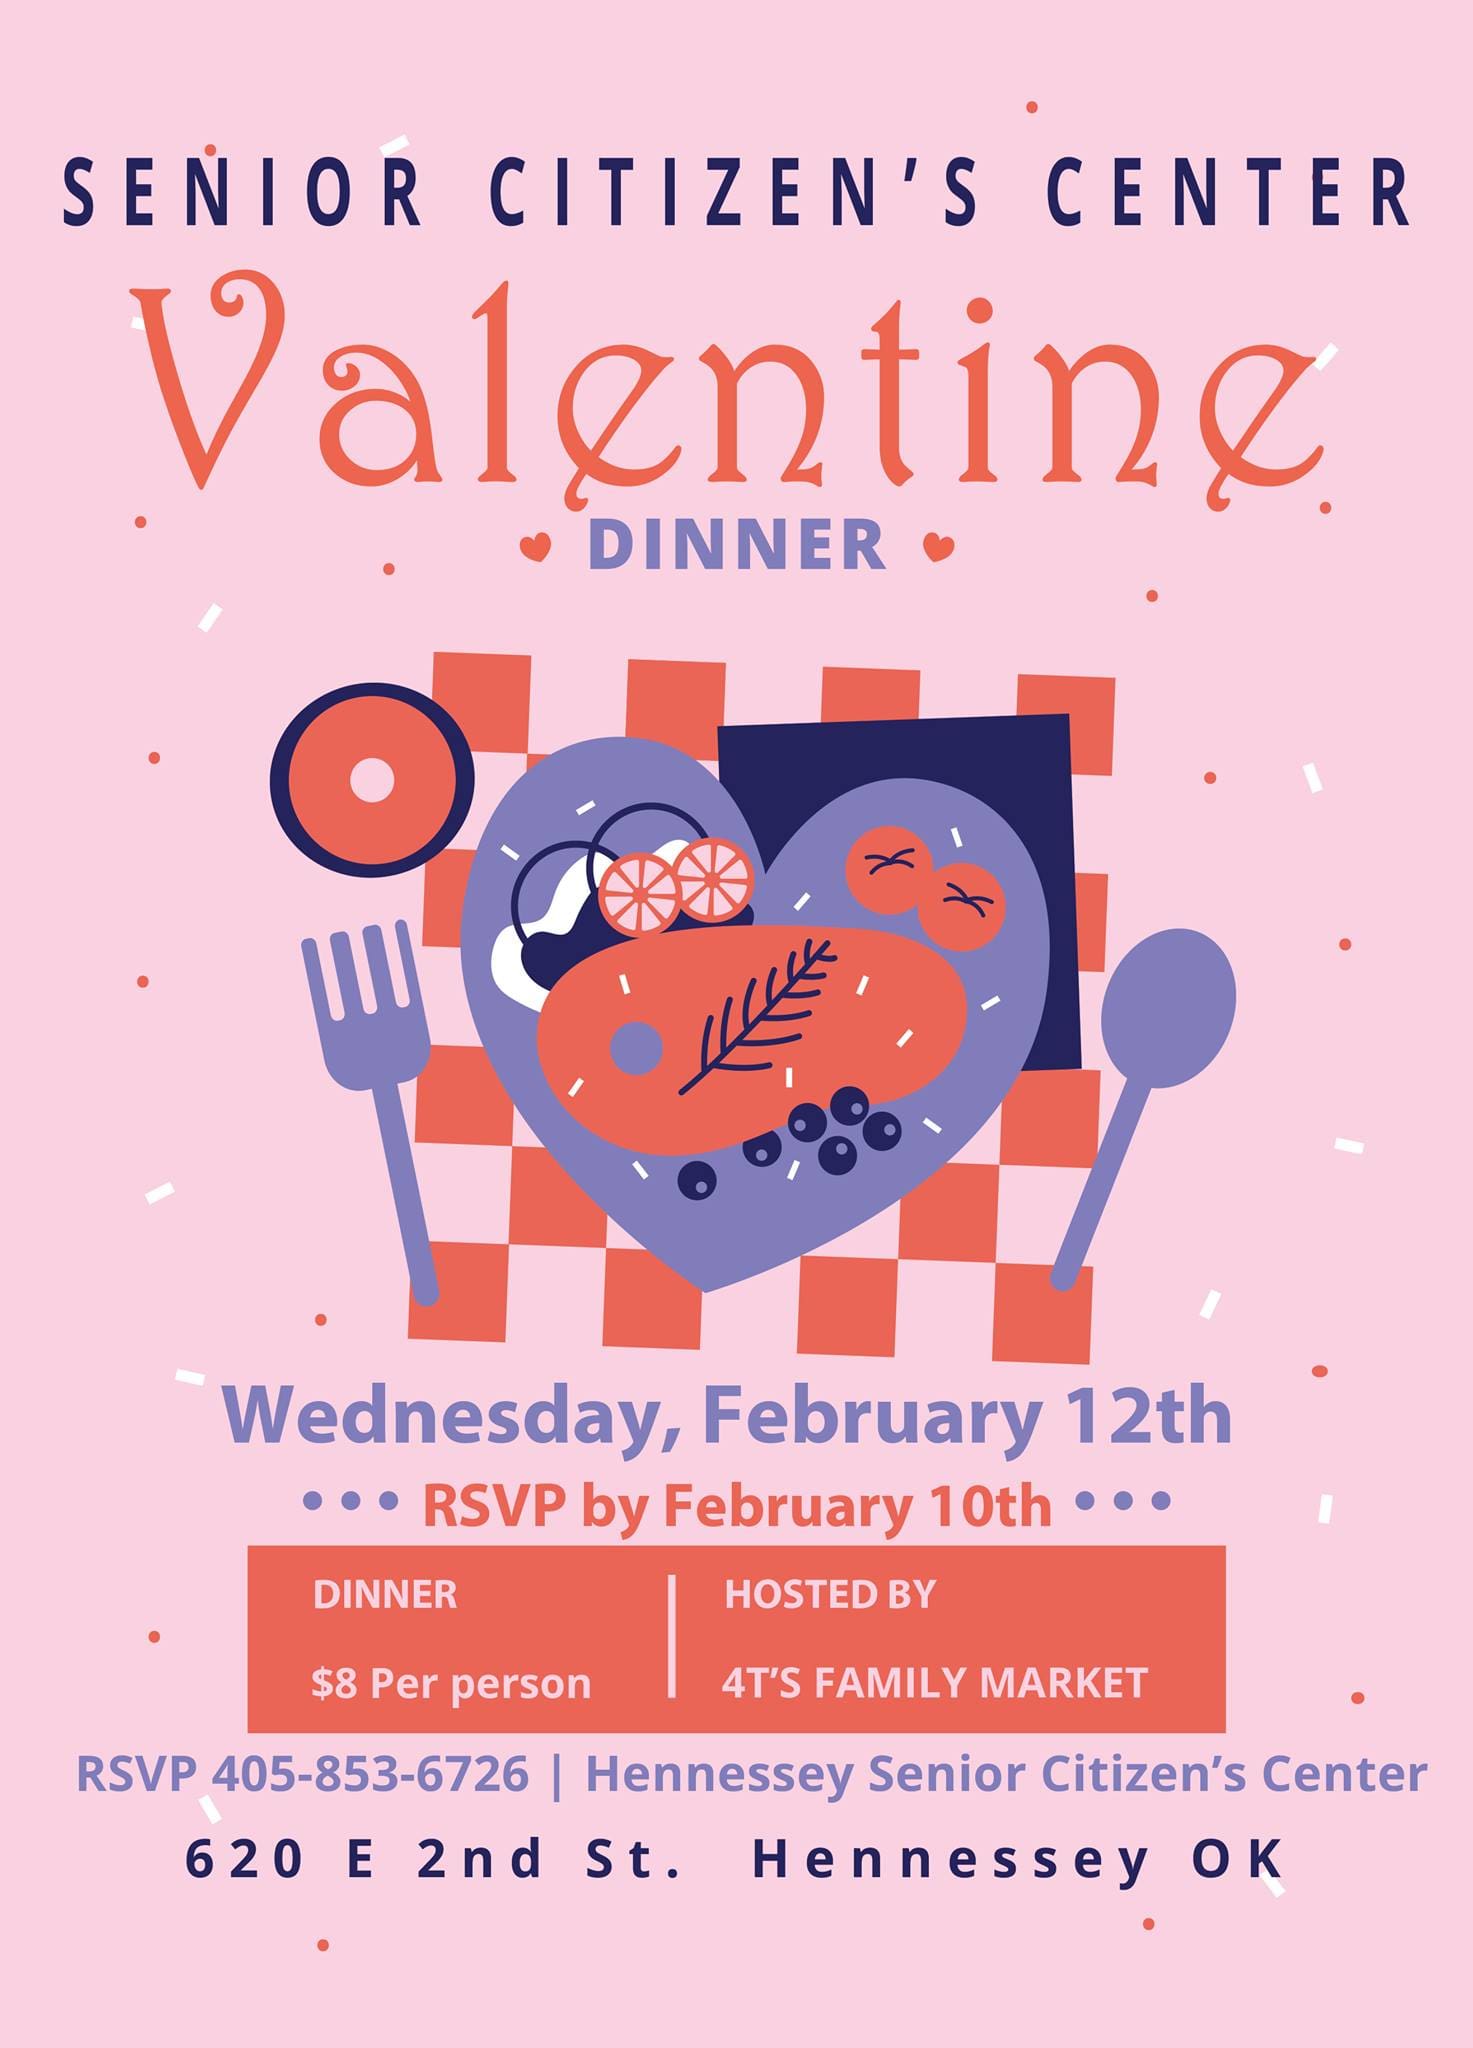 YUM! SENIOR CITIZEN’S CENTER HAS A VALENTINE DINNER PLANNED. Hosted by 4’Ts